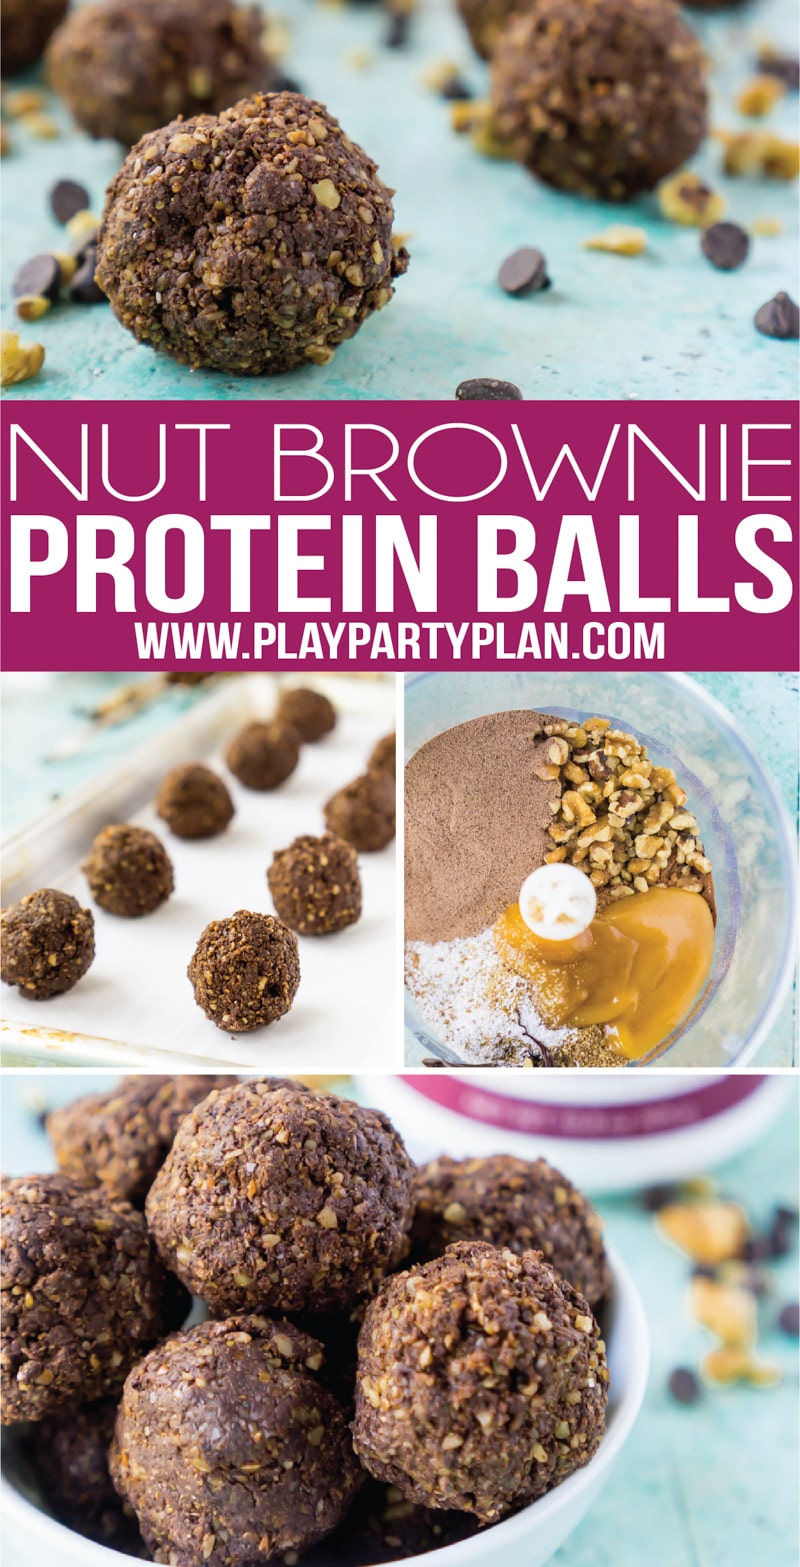 These no bake chocolate brownie protein balls are a healthy alternative when you’re craving something sweet! They’re gluten free and use cocoa powder and low carb chocolate chips for a hint of sweetness! They’re easy to make and great for everyone - for kids and for adults!